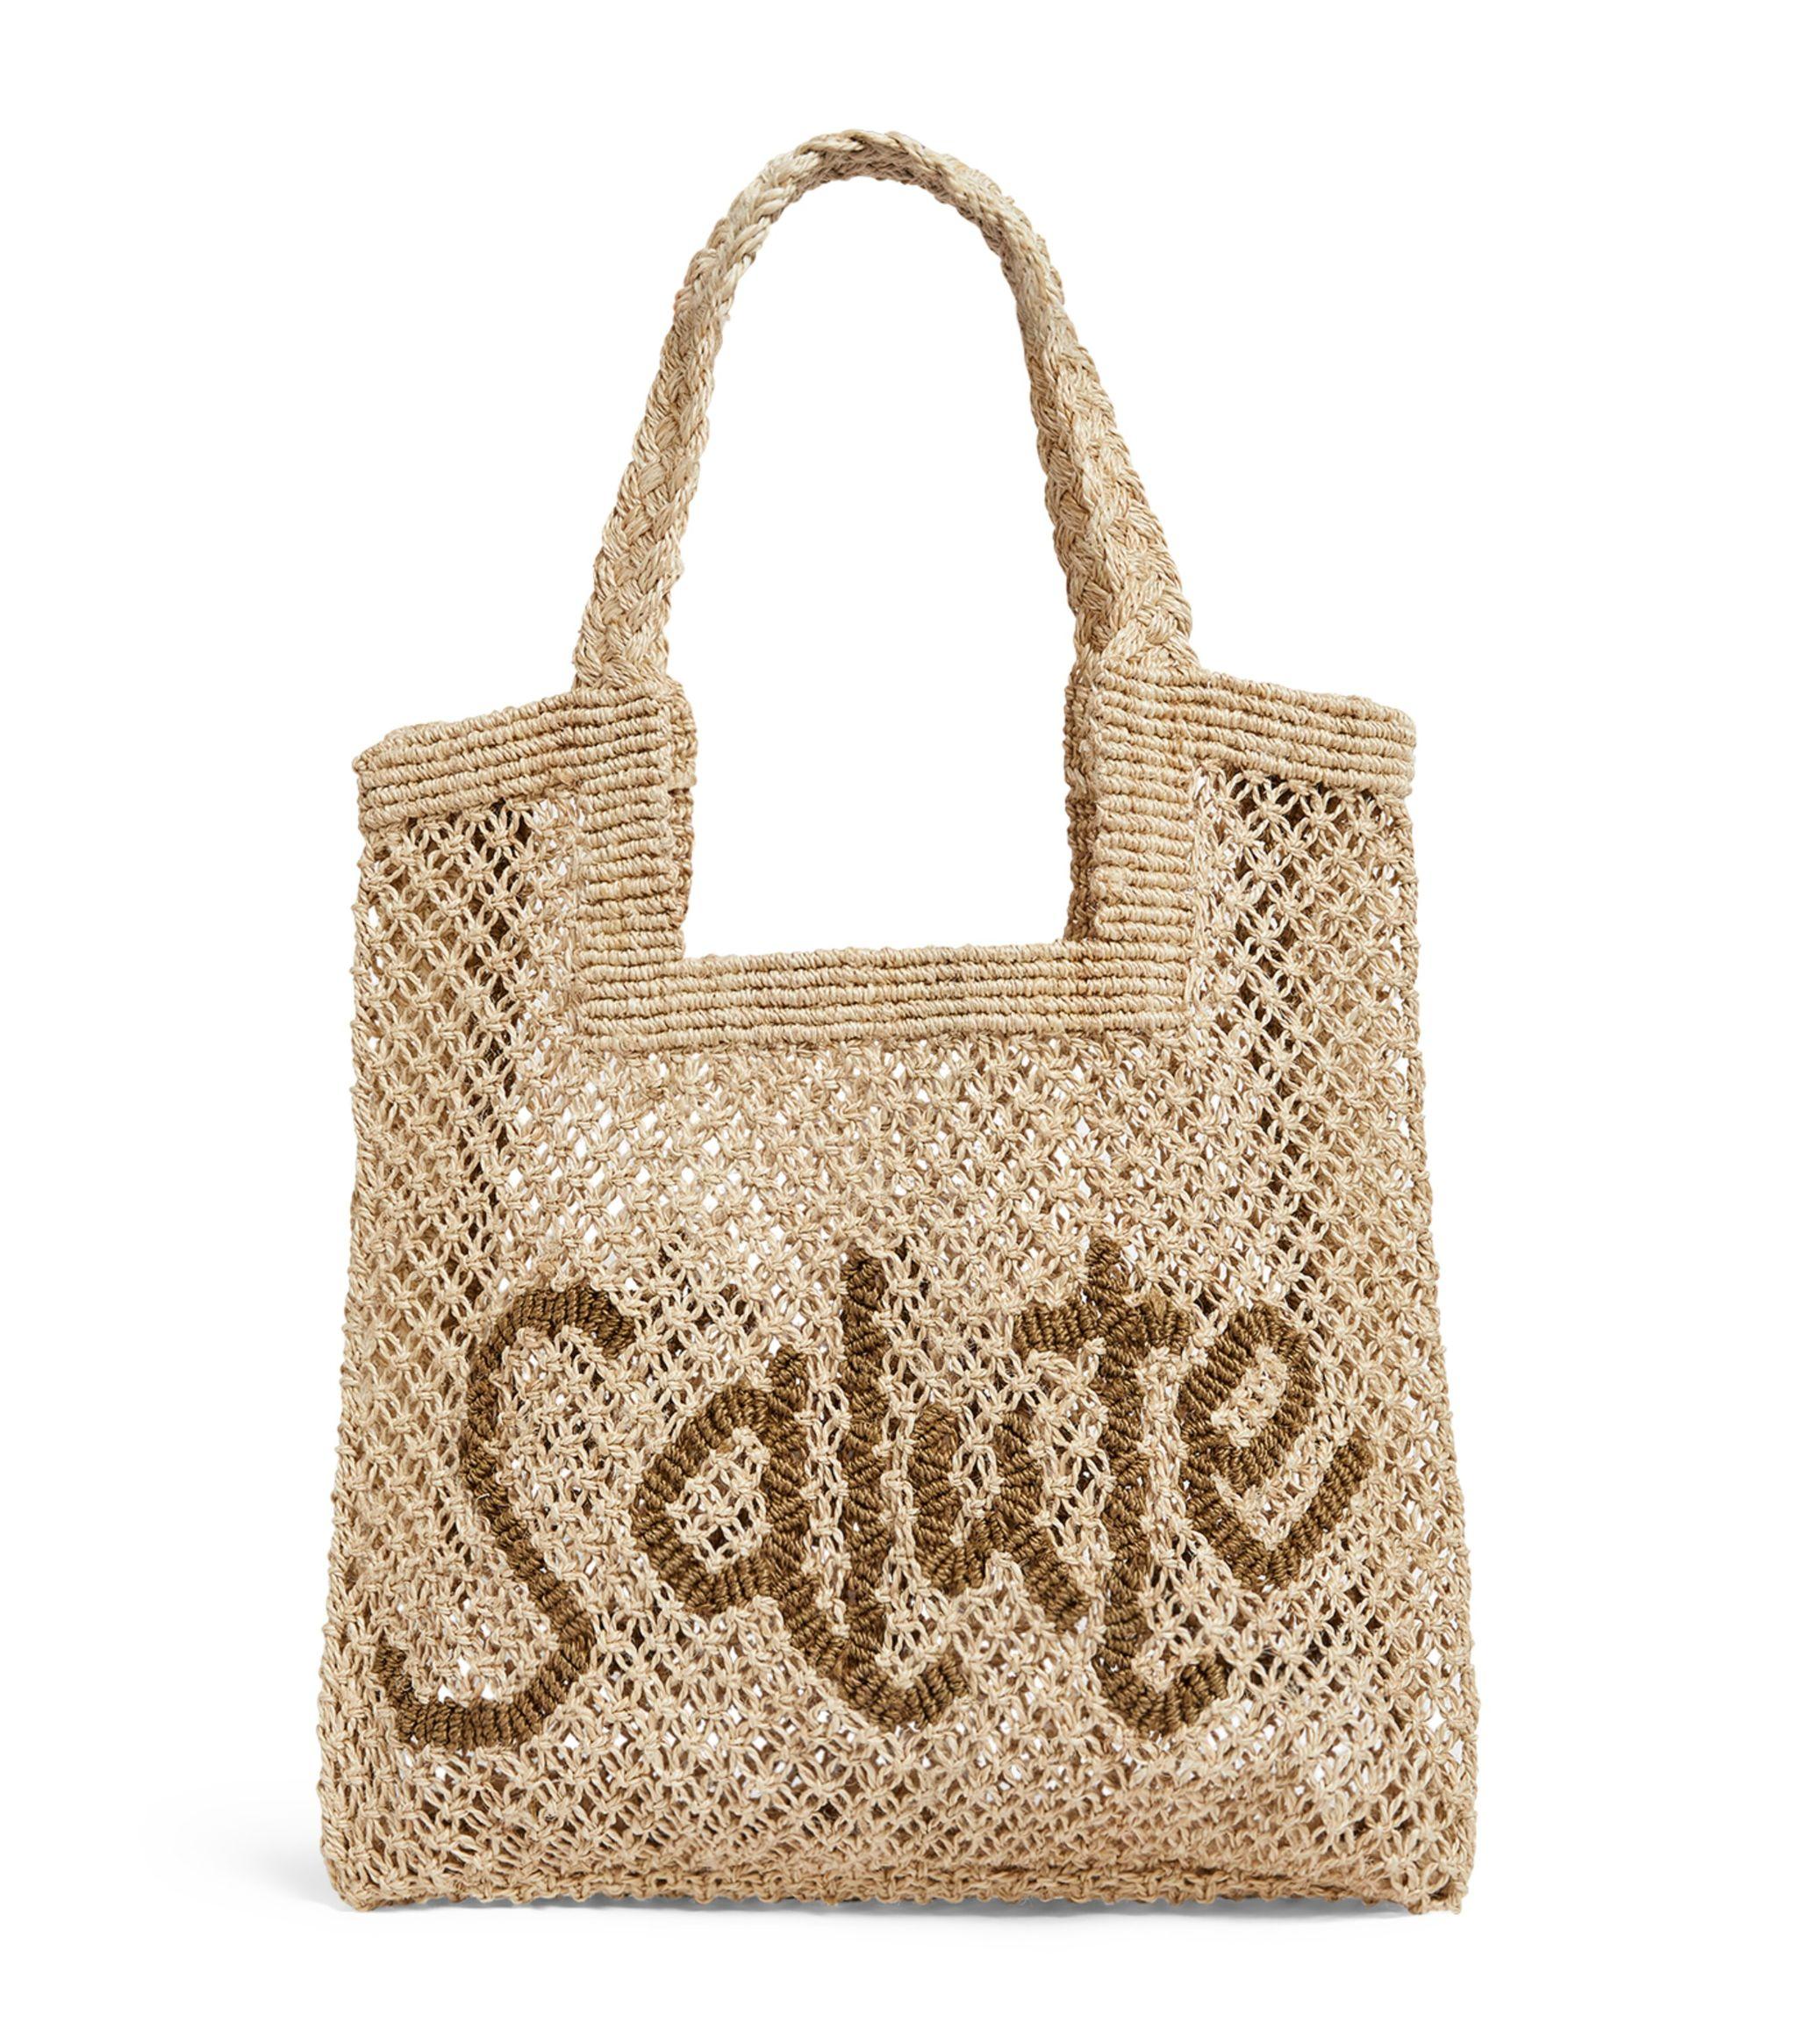 The Jacksons Small Salute Tote Bag in Natural